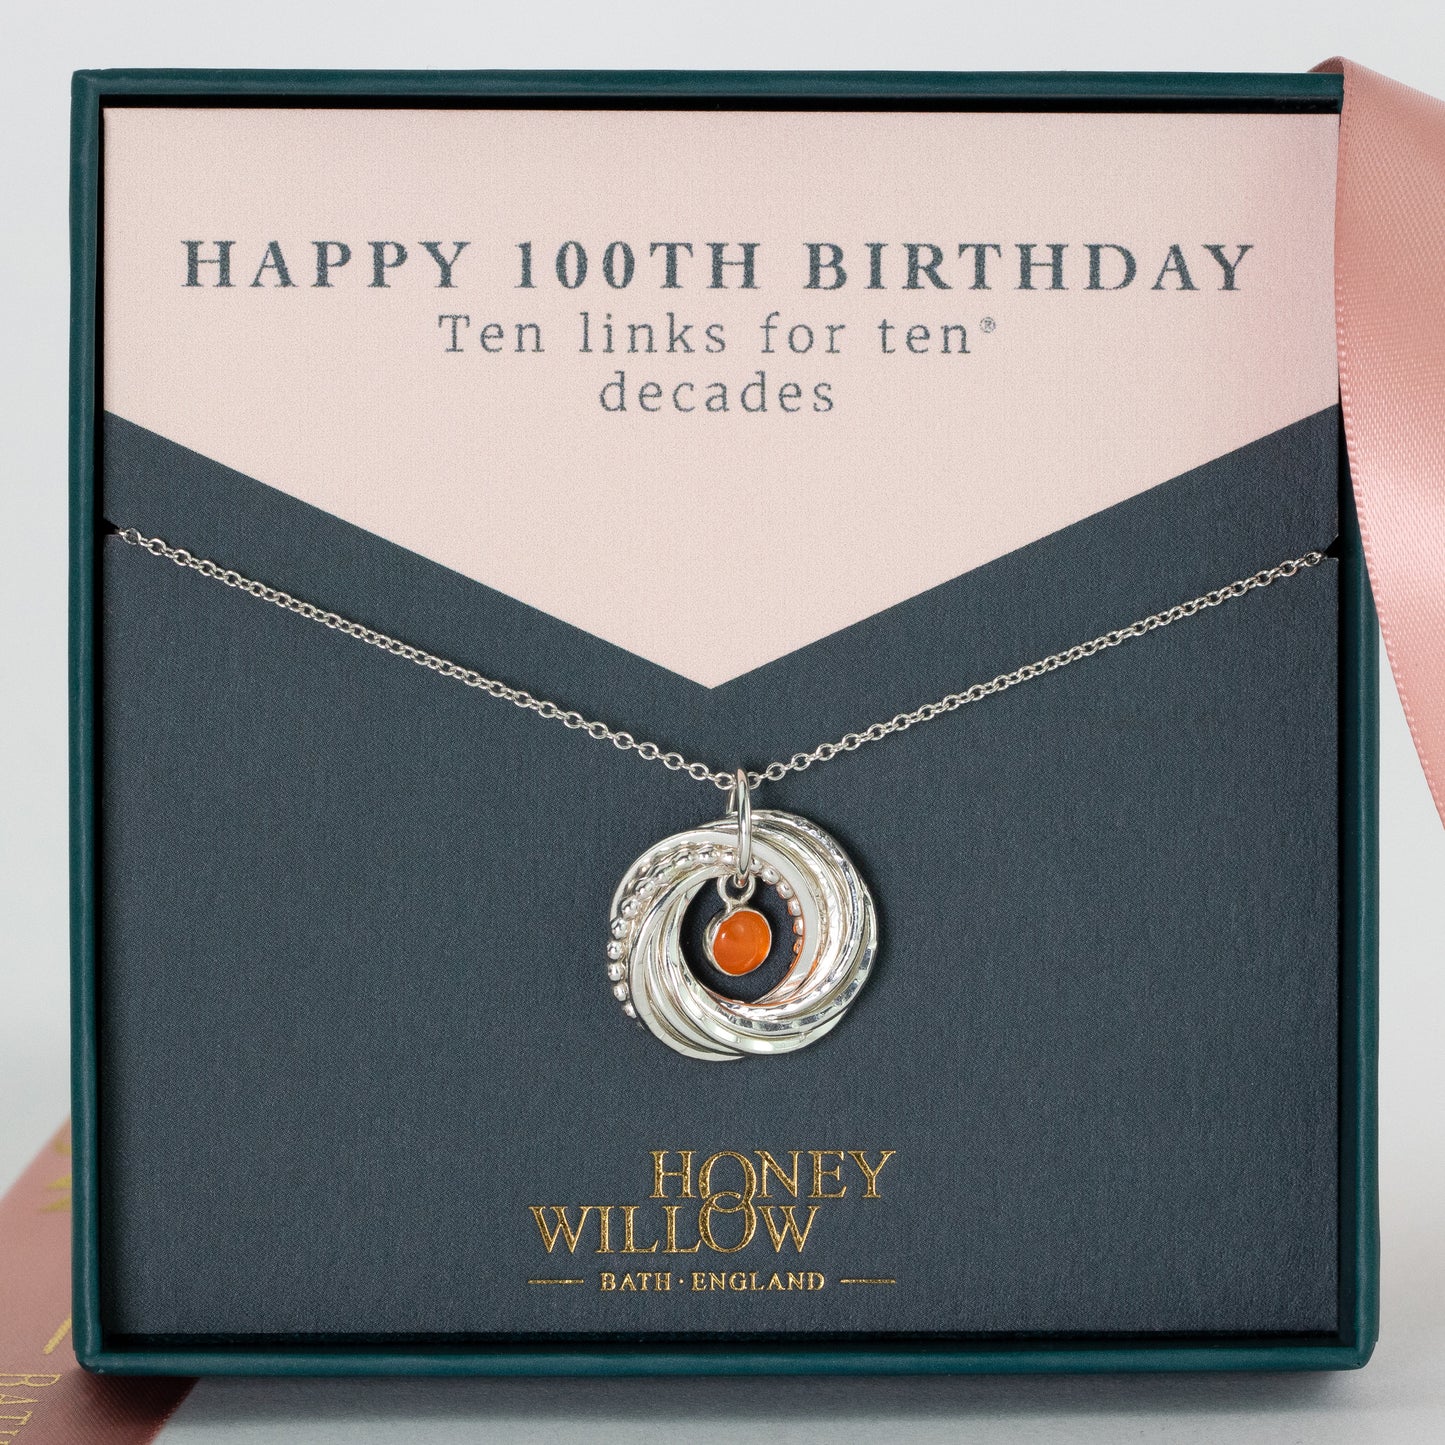 100th Birthday Birthstone Necklace - The Original 10 Links for 10 Decades Necklace - Petite Silver